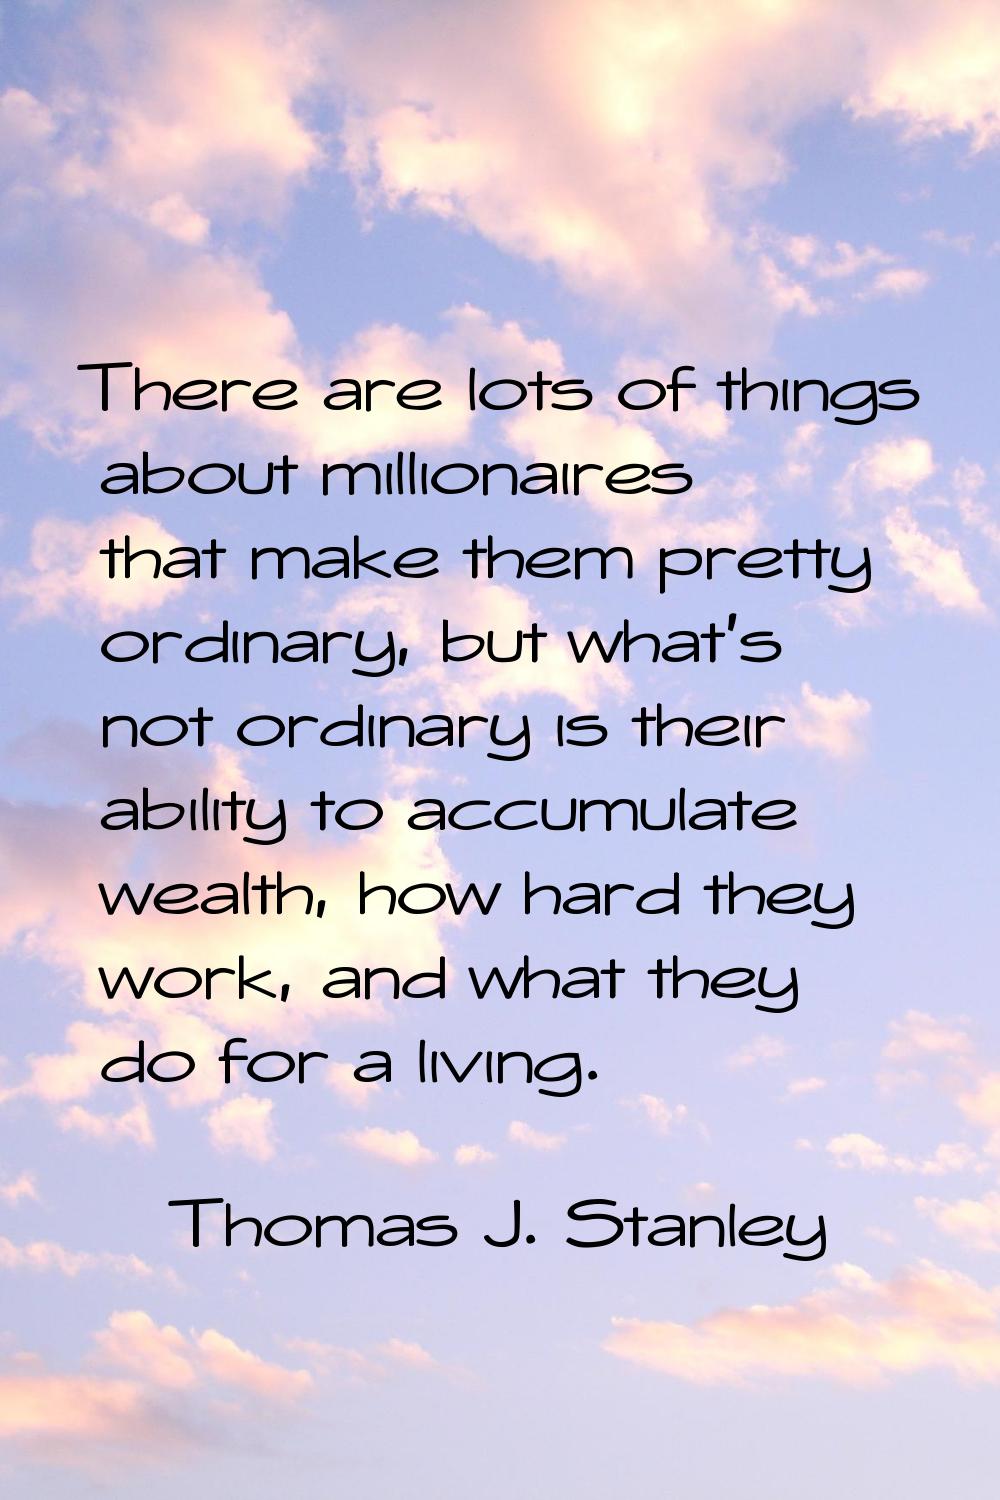 There are lots of things about millionaires that make them pretty ordinary, but what's not ordinary